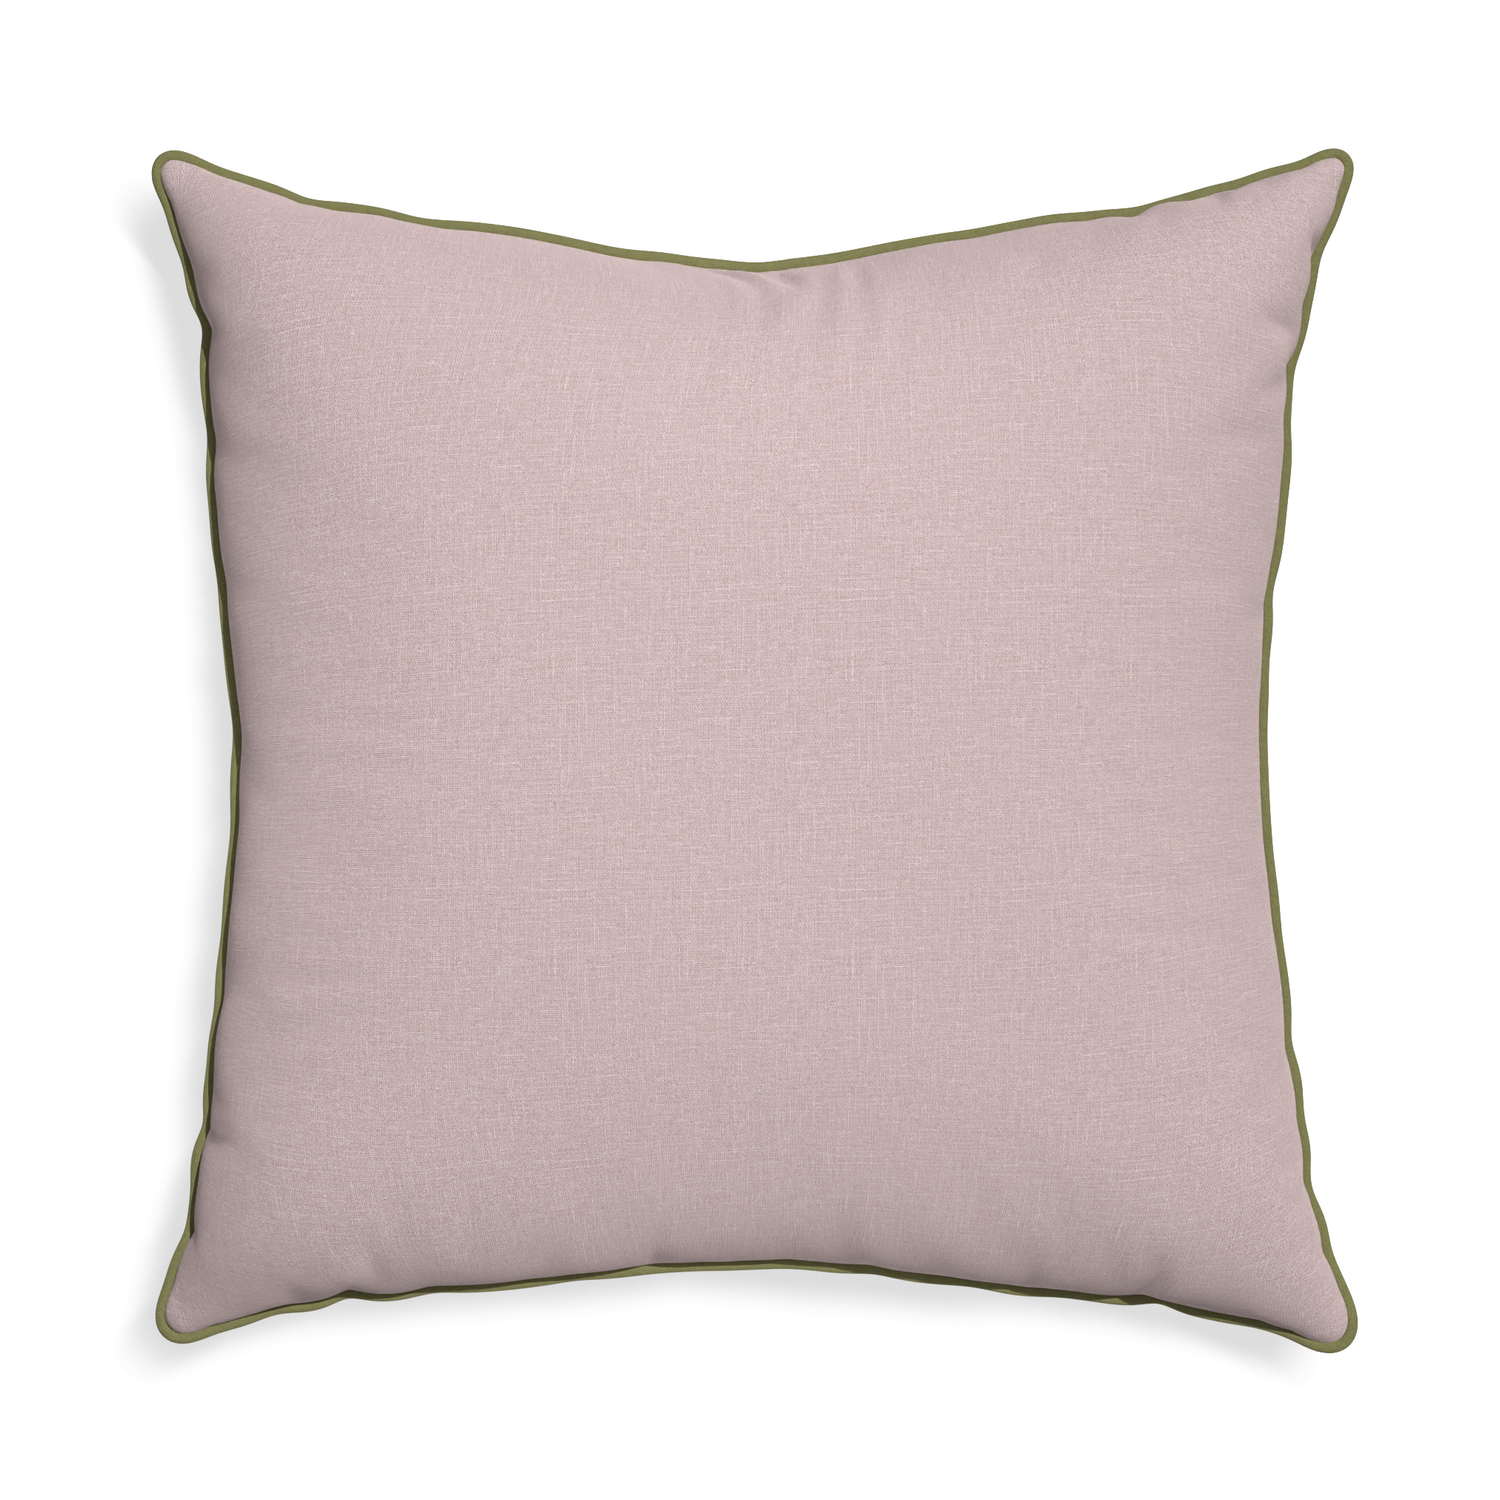 Euro-sham orchid custom mauve pinkpillow with moss piping on white background